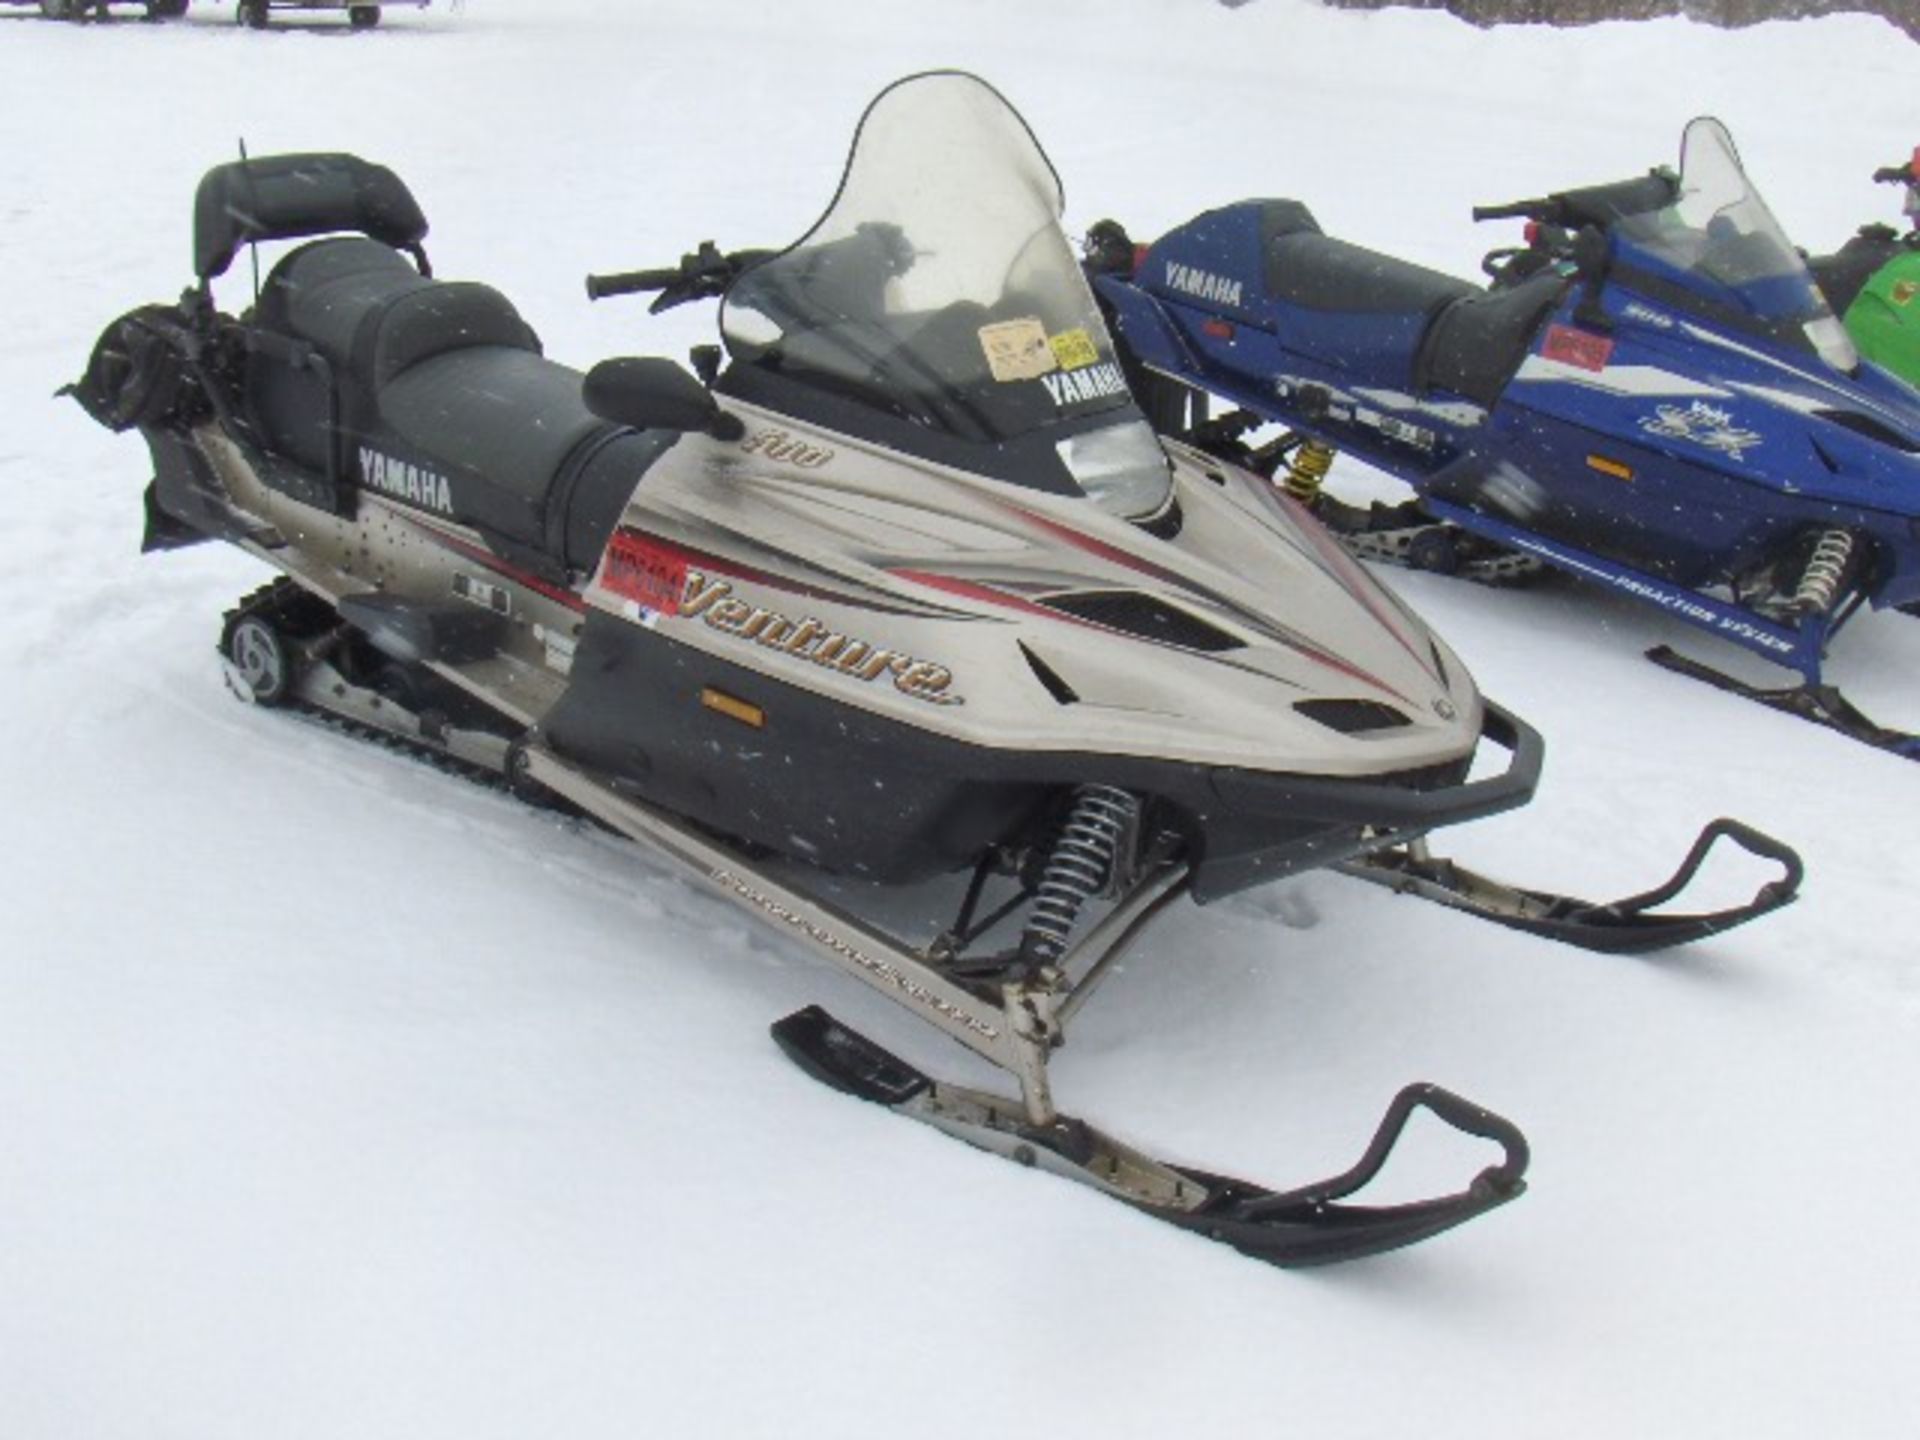 2001 YAMAHA 500 VENTURE  8CY009425 snowmobile, owner started at time of auction check in, electric - Image 2 of 4